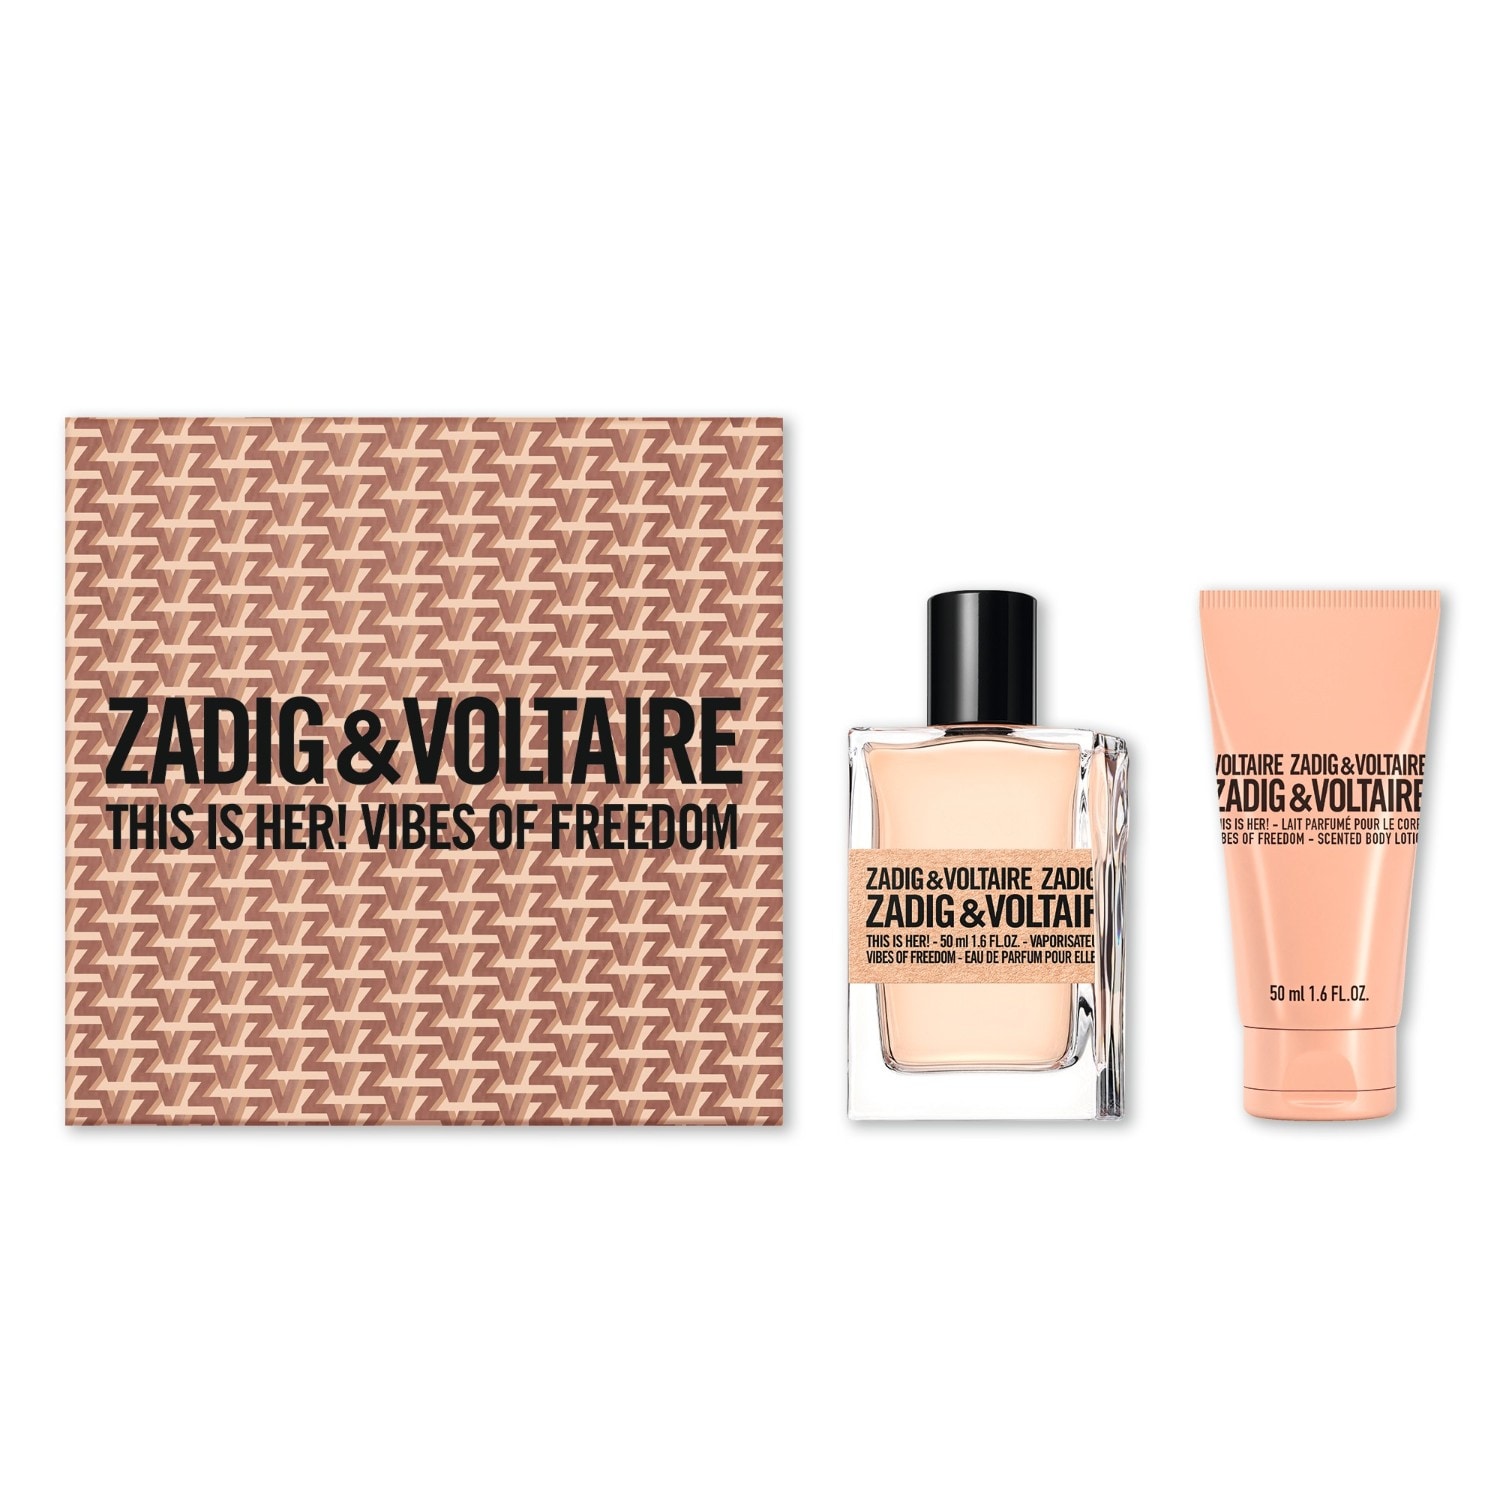 Zadig&Voltaire This is here! Vibes of Freedom